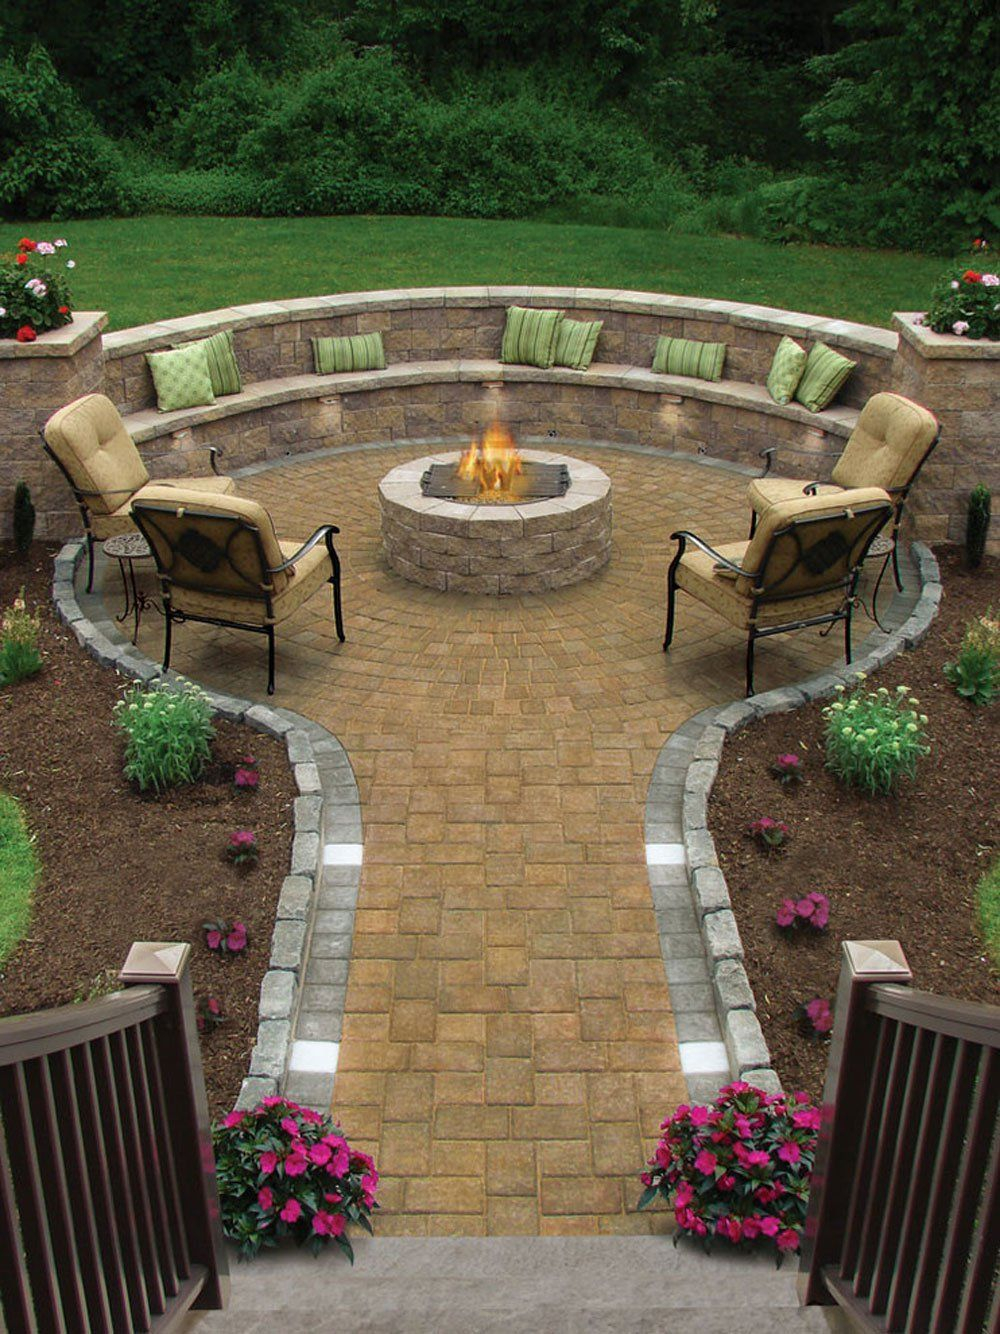 17 Of The Most Amazing Seating Area Around The Fire Pit Ever within sizing 1000 X 1334